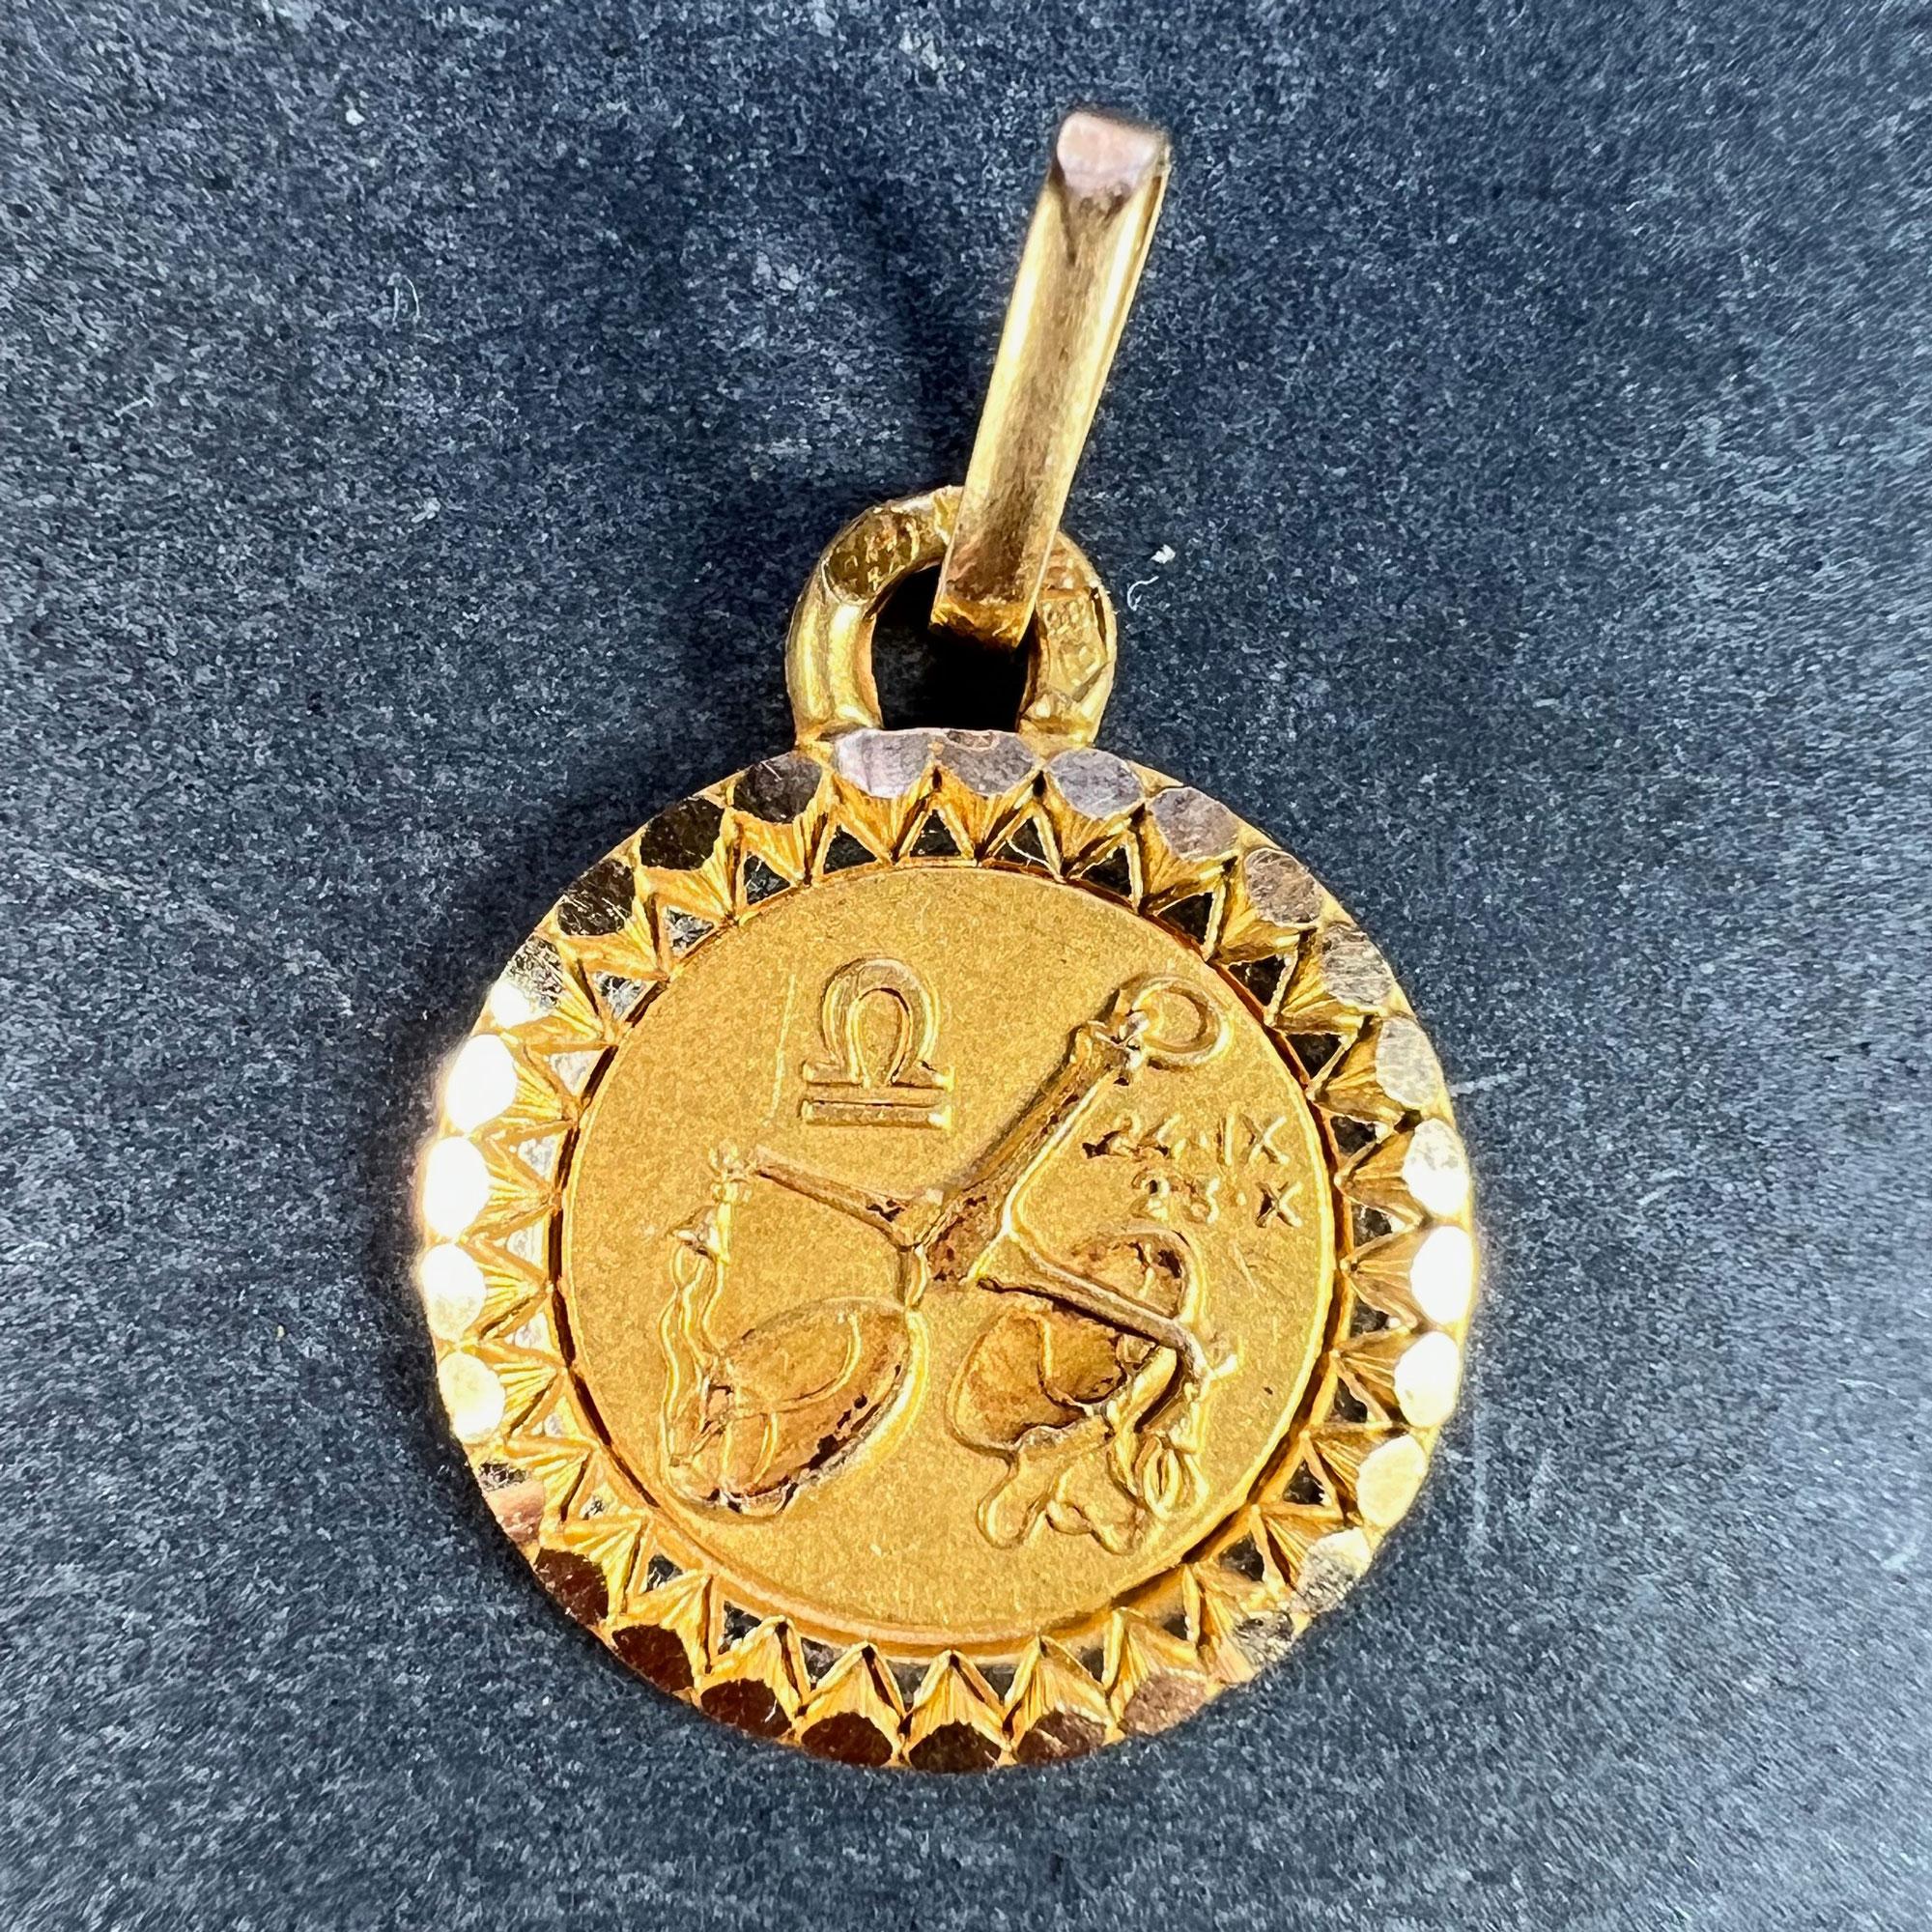 An 18 karat (18K) yellow gold charm pendant designed as the Zodiac sign of Libra, depicting a set of balance scales with the dates 24 IX (September) and 23 X (October). Stamped with the eagle mark for 18 karat gold and French manufacture with makers